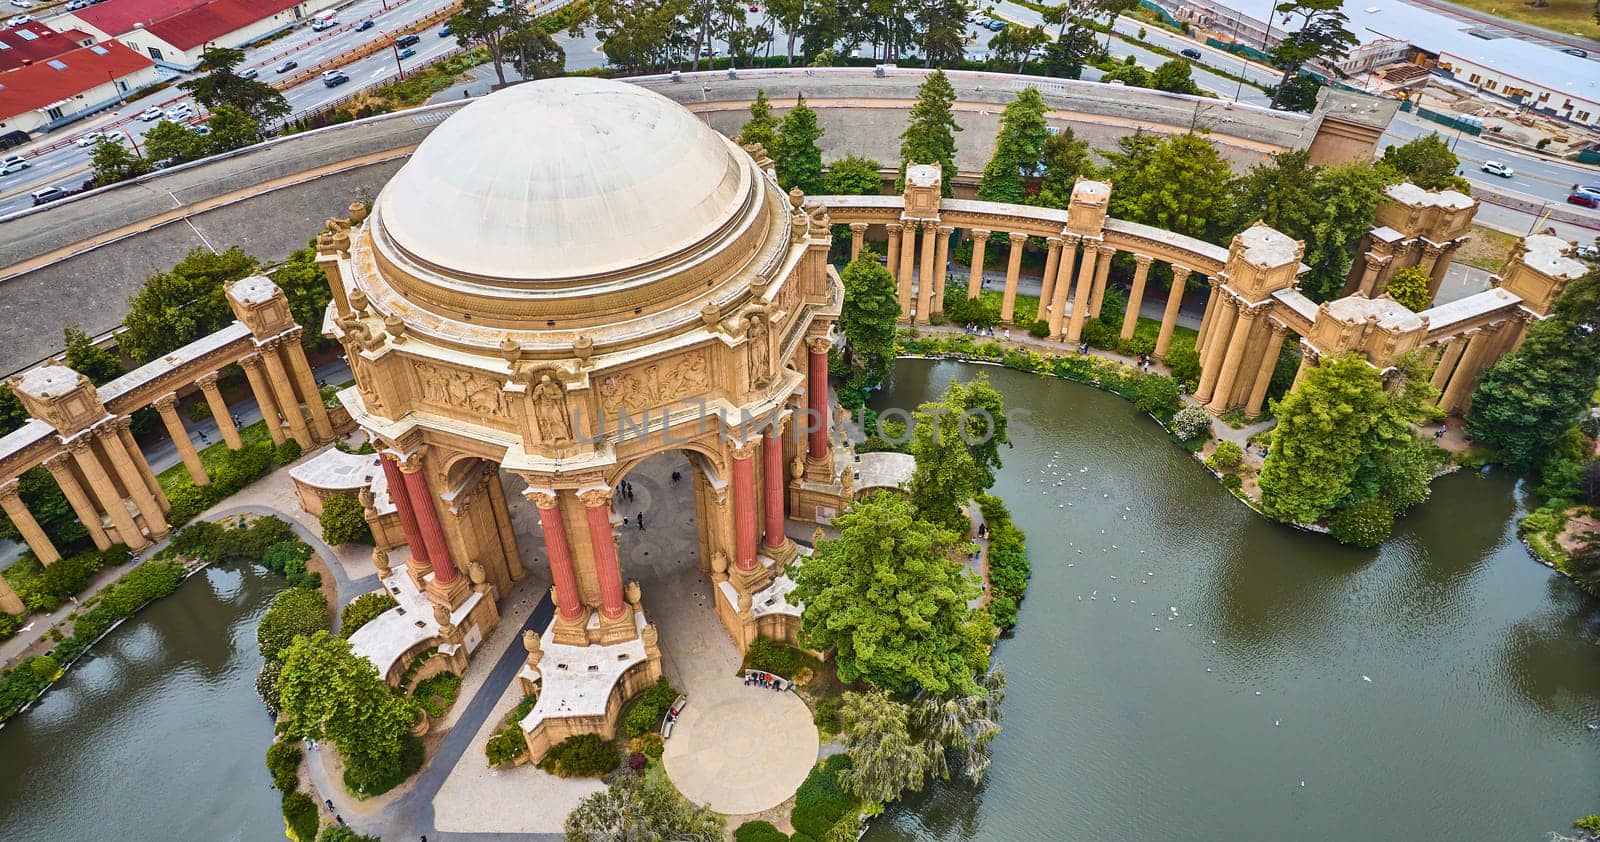 Image of Palace of Fine Arts rotunda and colonnade around lagoon in downward aerial